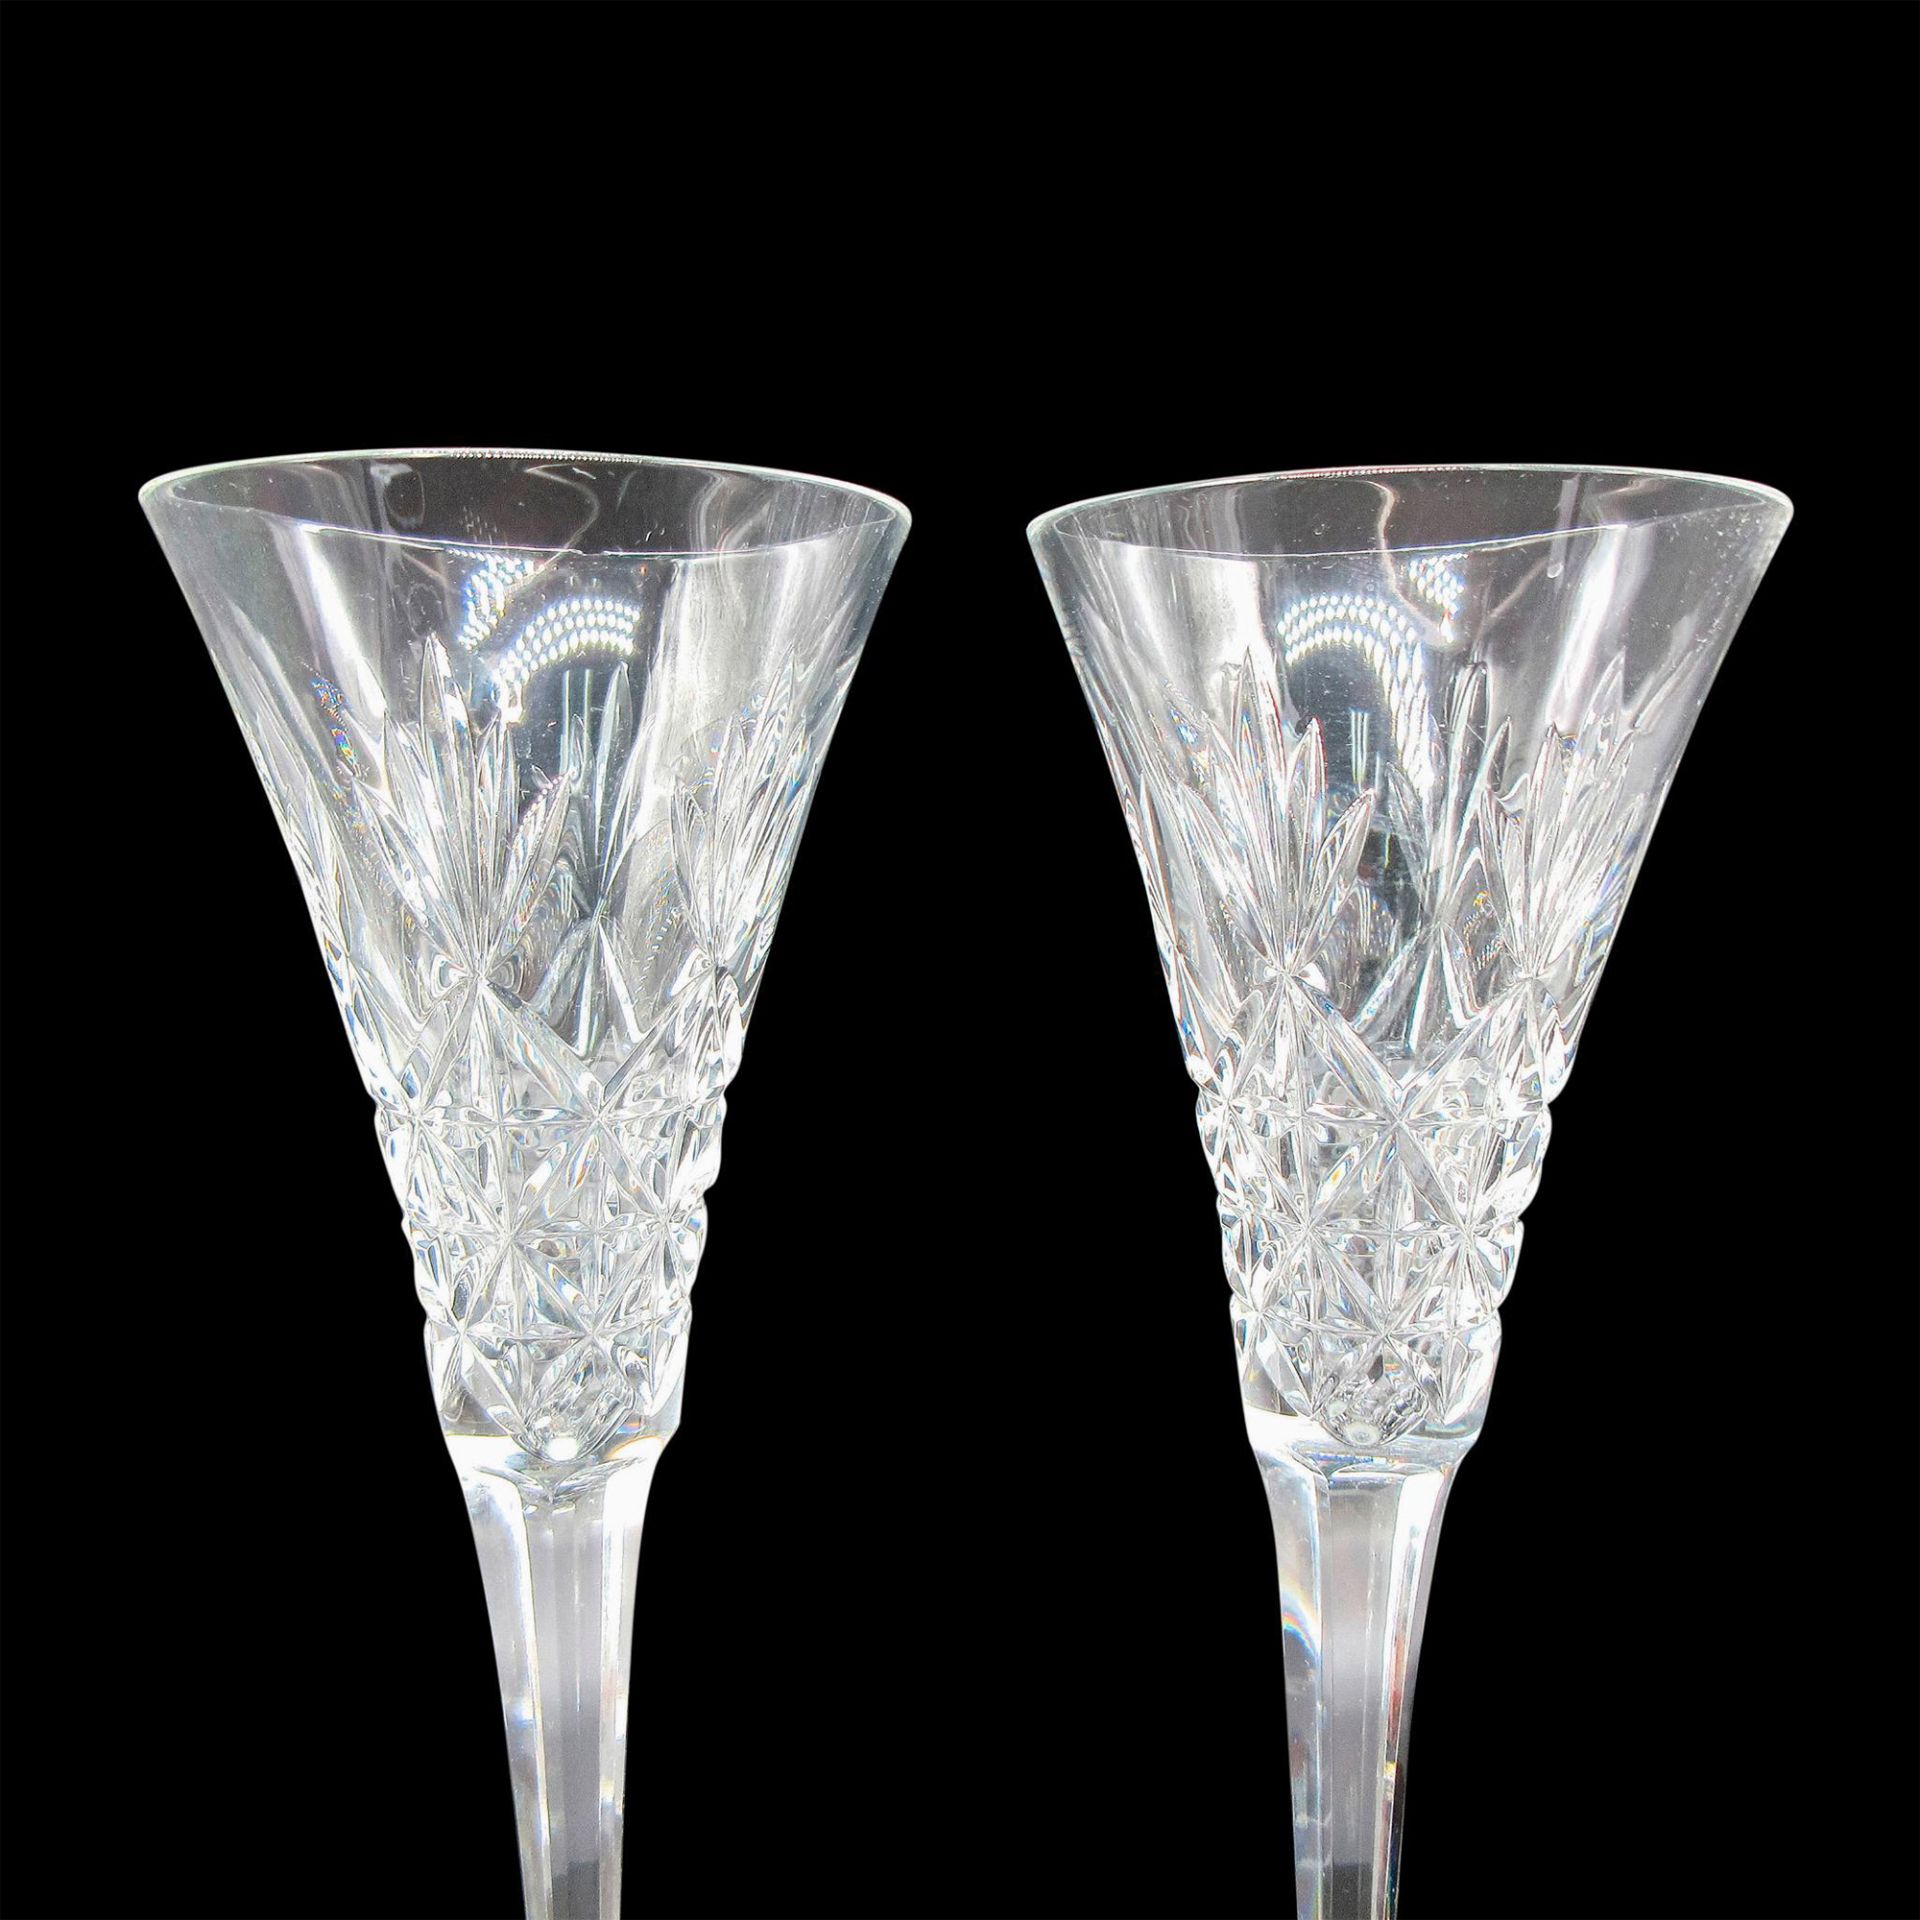 Pair of Waterford Crysal Champagne Flutes, Snow Crystals - Image 2 of 4